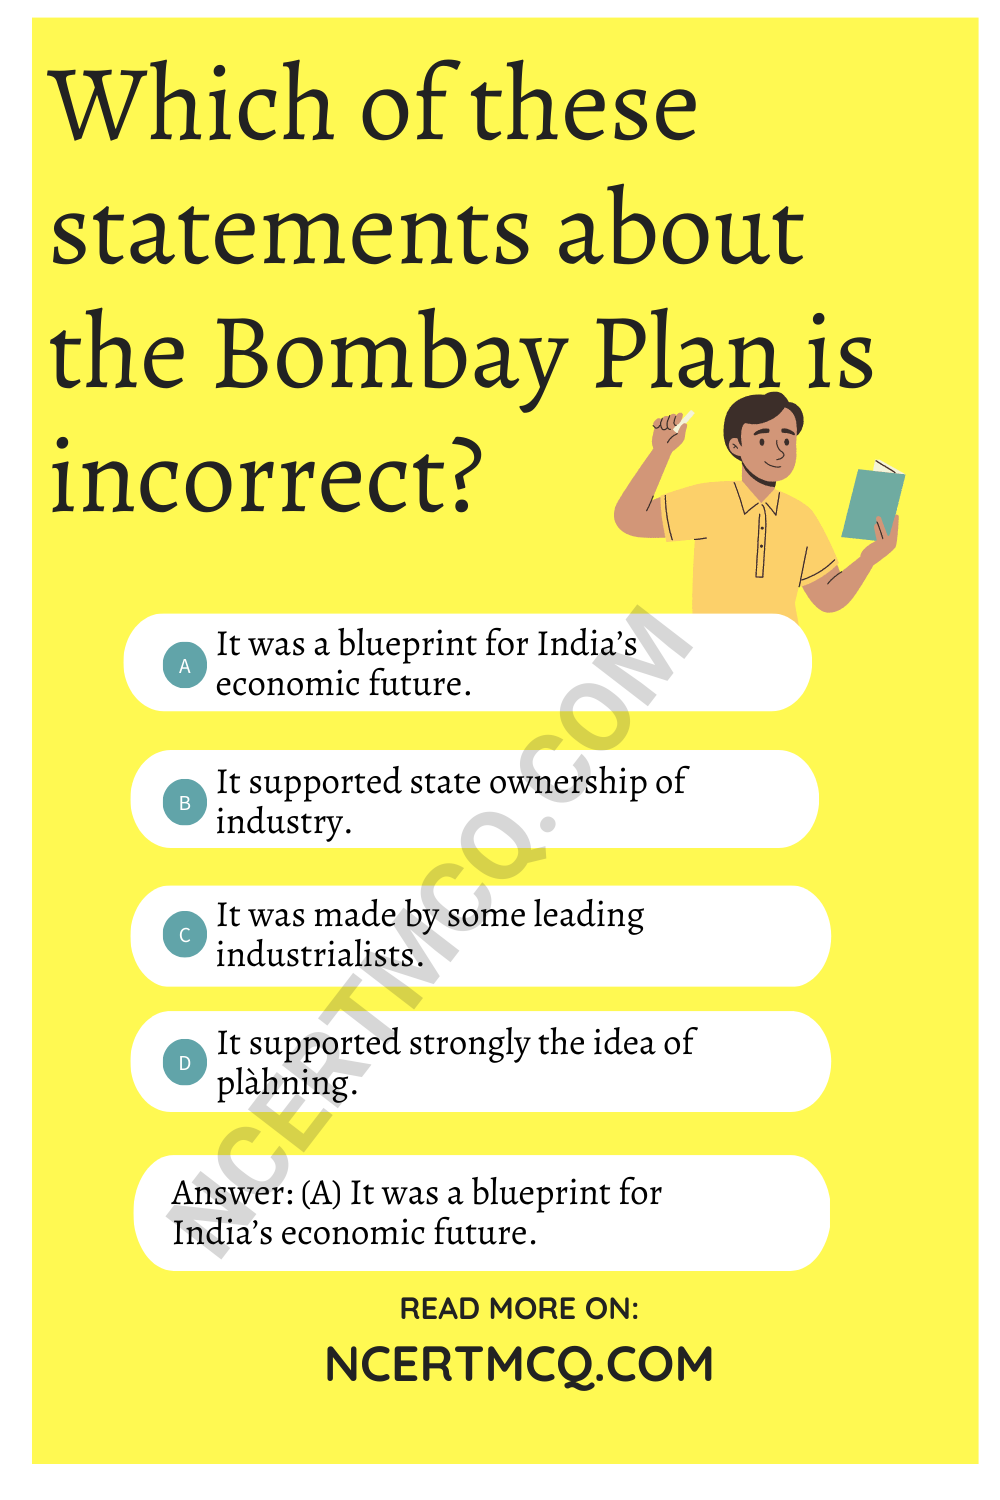 Which of these statements about the Bombay Plan is incorrect?